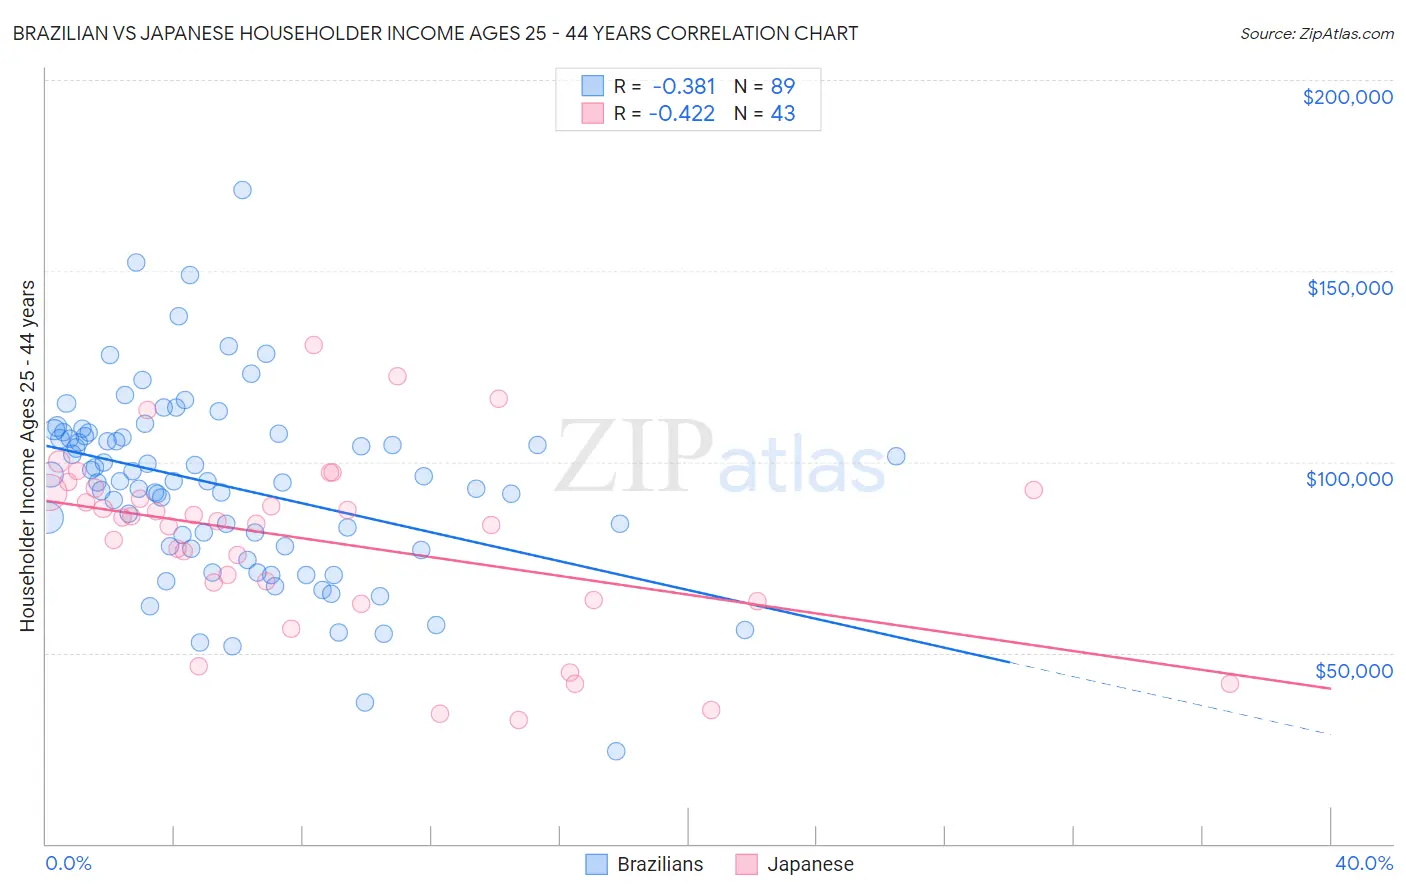 Brazilian vs Japanese Householder Income Ages 25 - 44 years